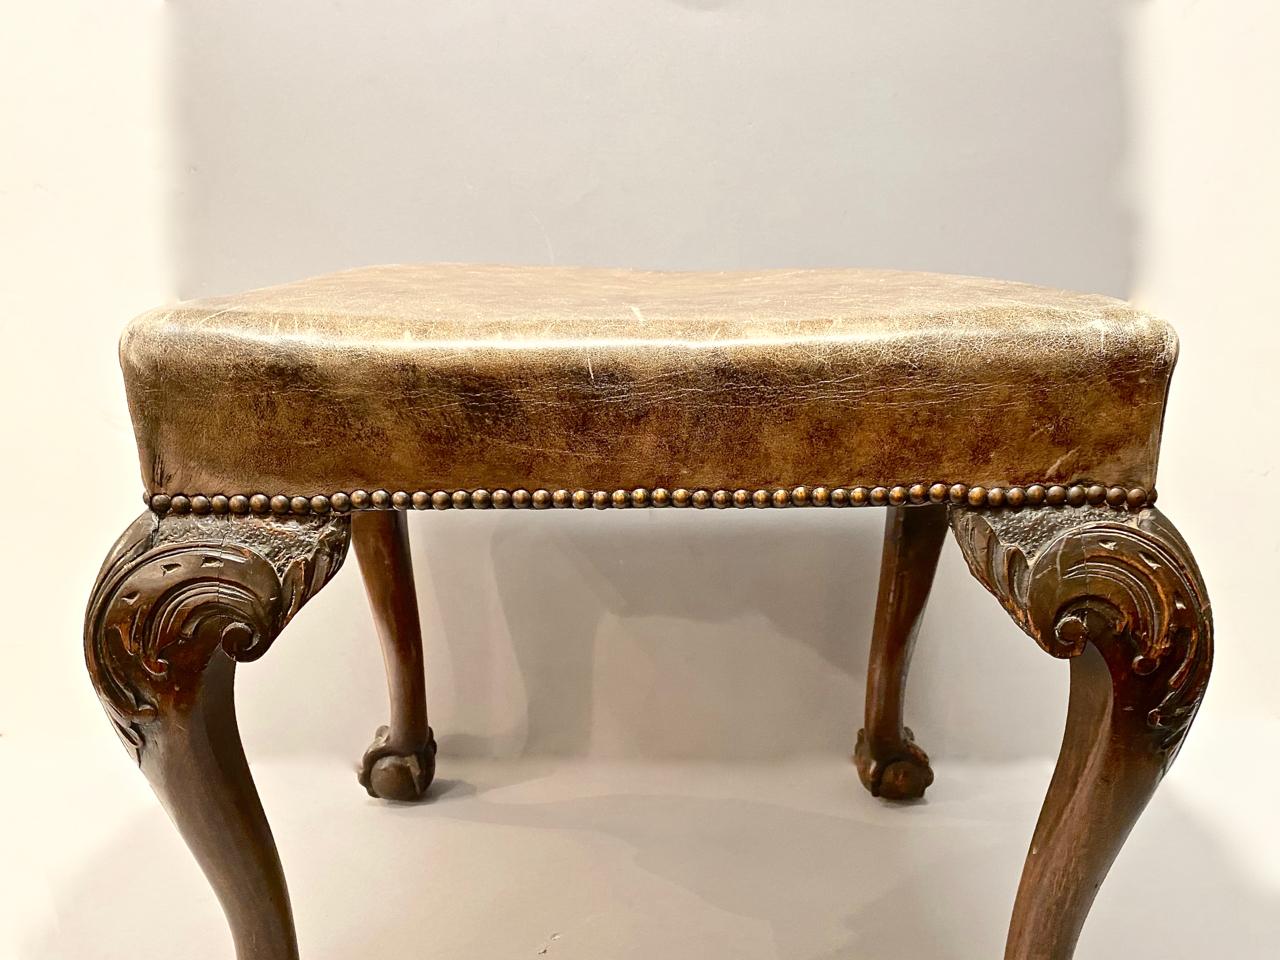 This is a great example of an 18th century English mahogany Chippendale or George III stool. The stool is upholstered in a caramel-toned vintage leather that shows just the right amount of patina and is further detailed in nail heads. The stool is